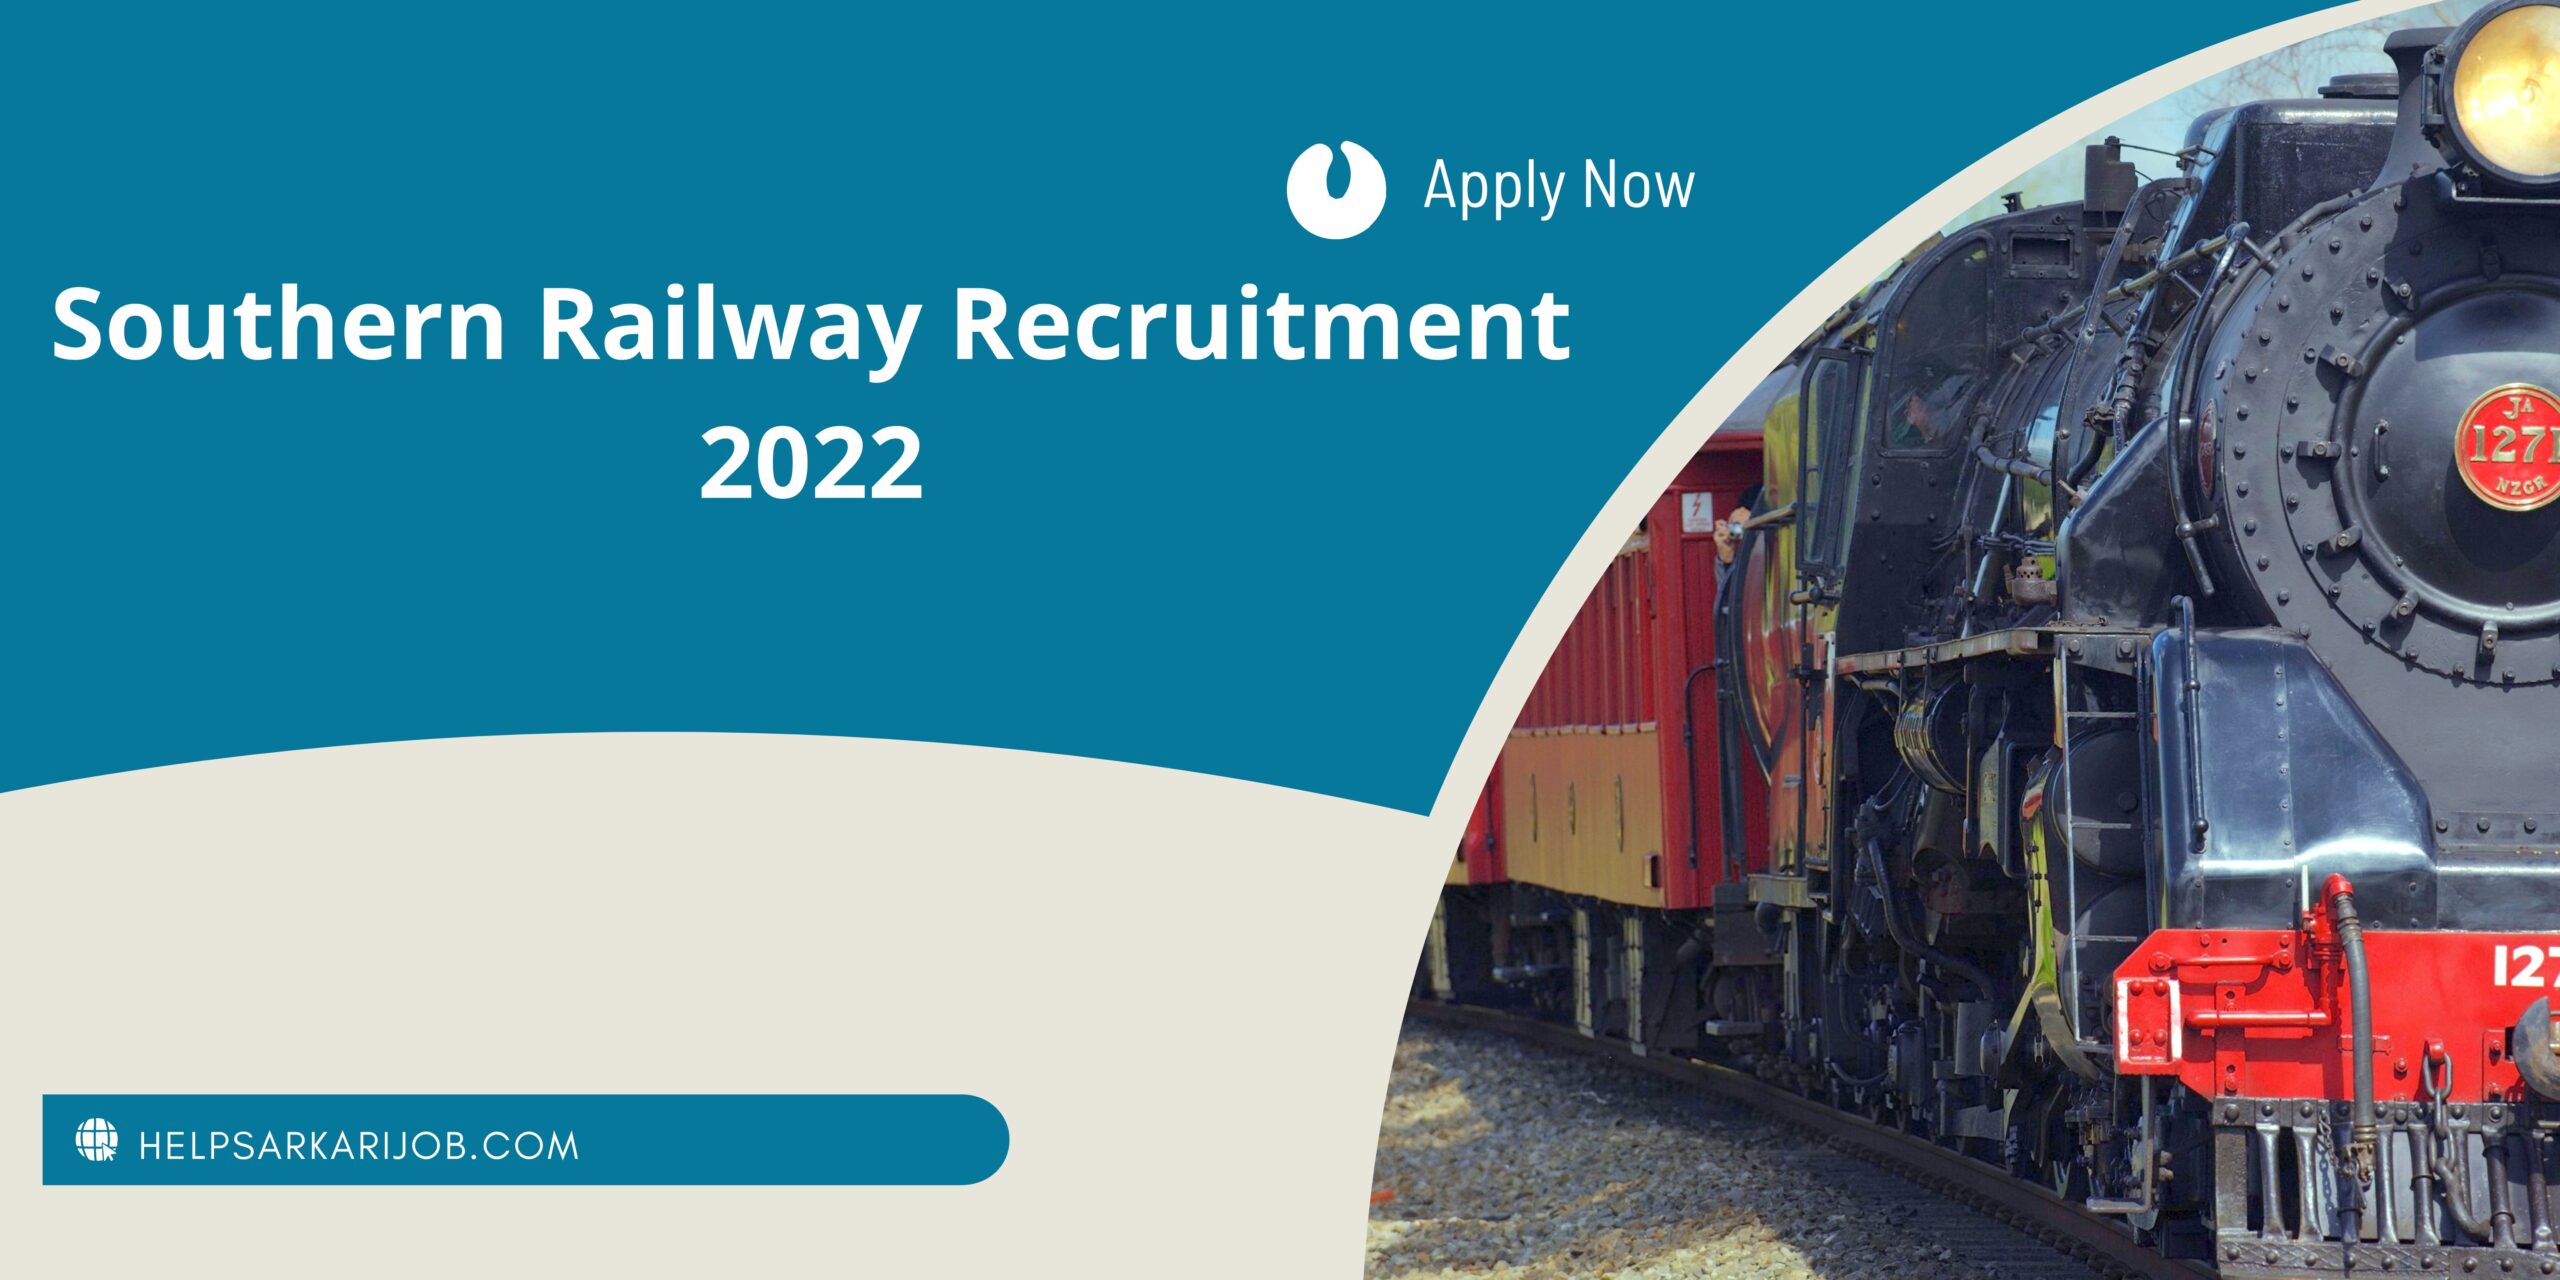 Southern Railway Recruitment 2022 scaled -